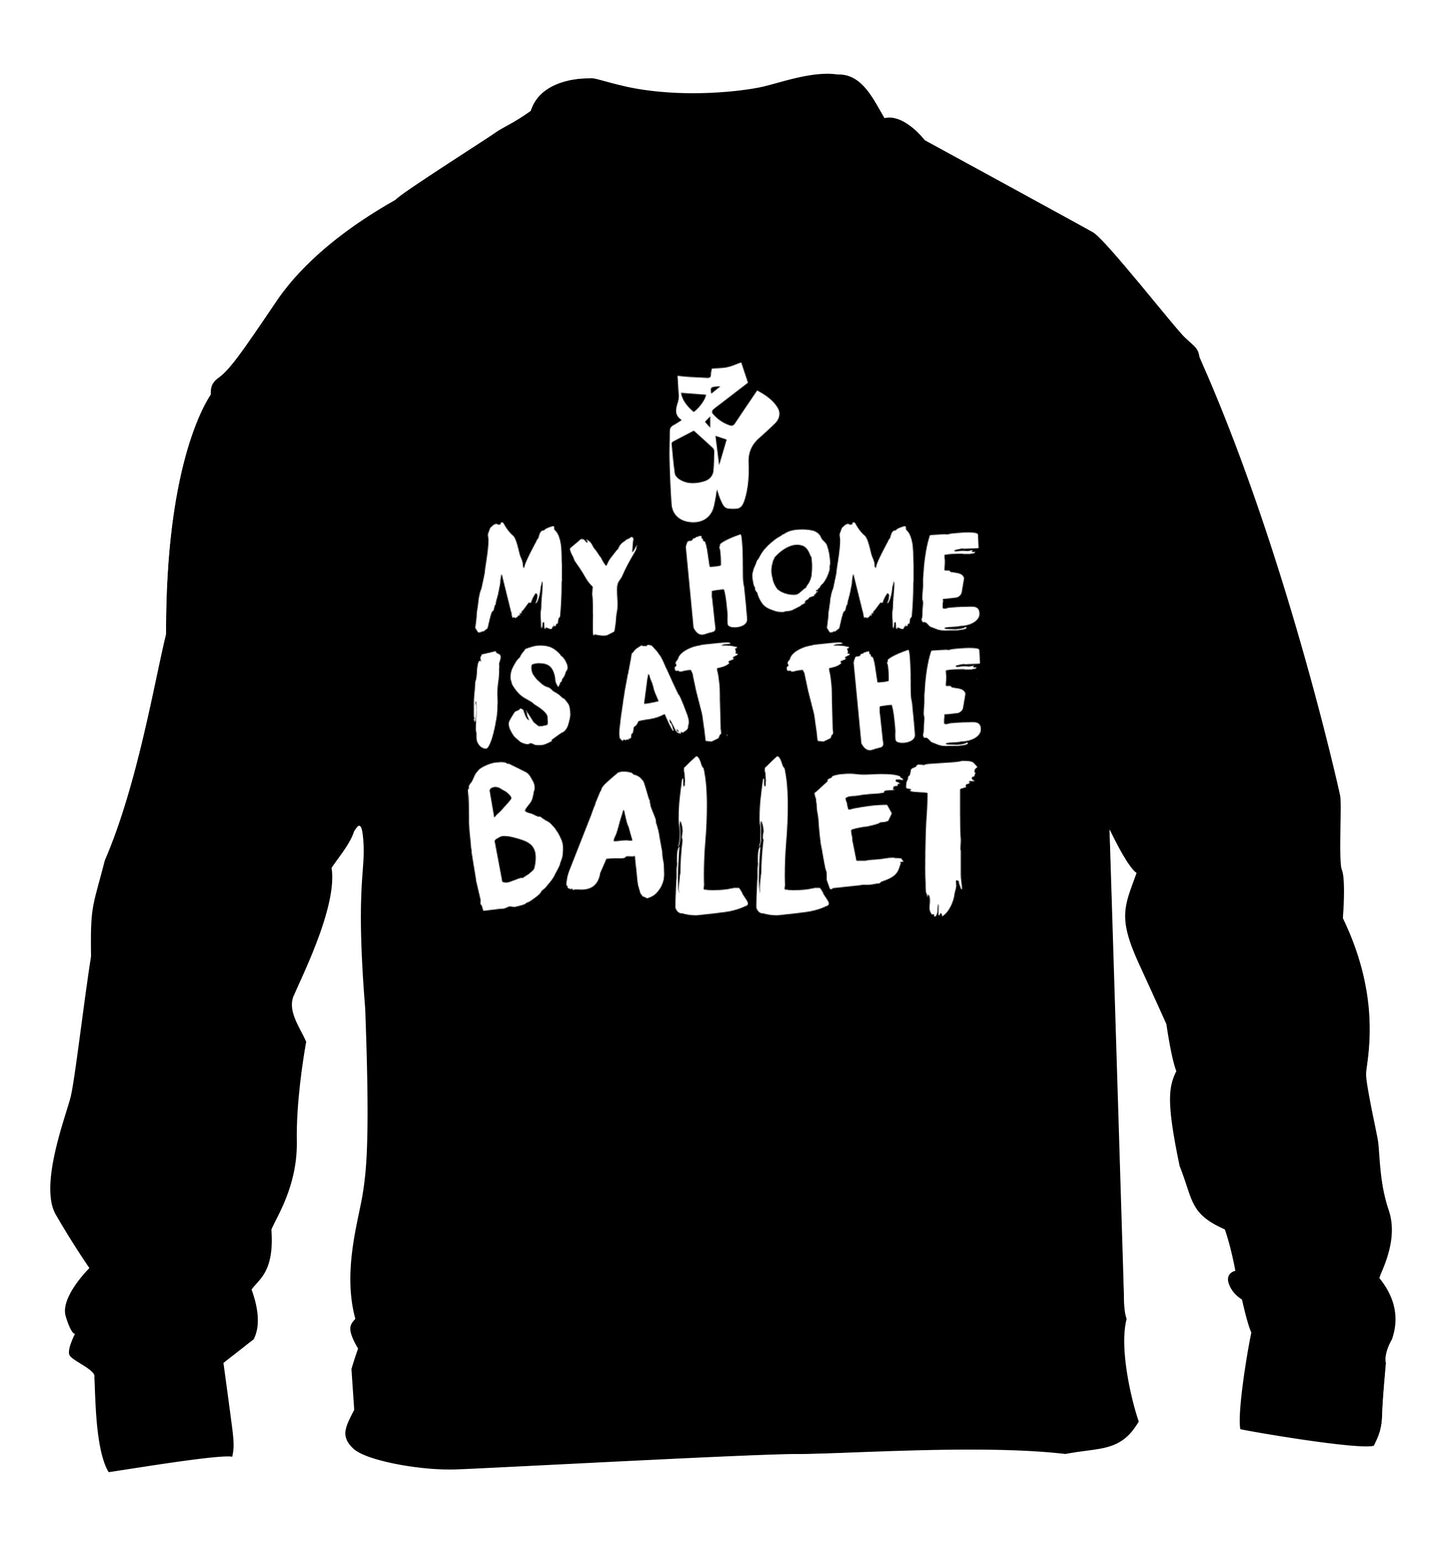 My home is at the ballet children's black sweater 12-14 Years